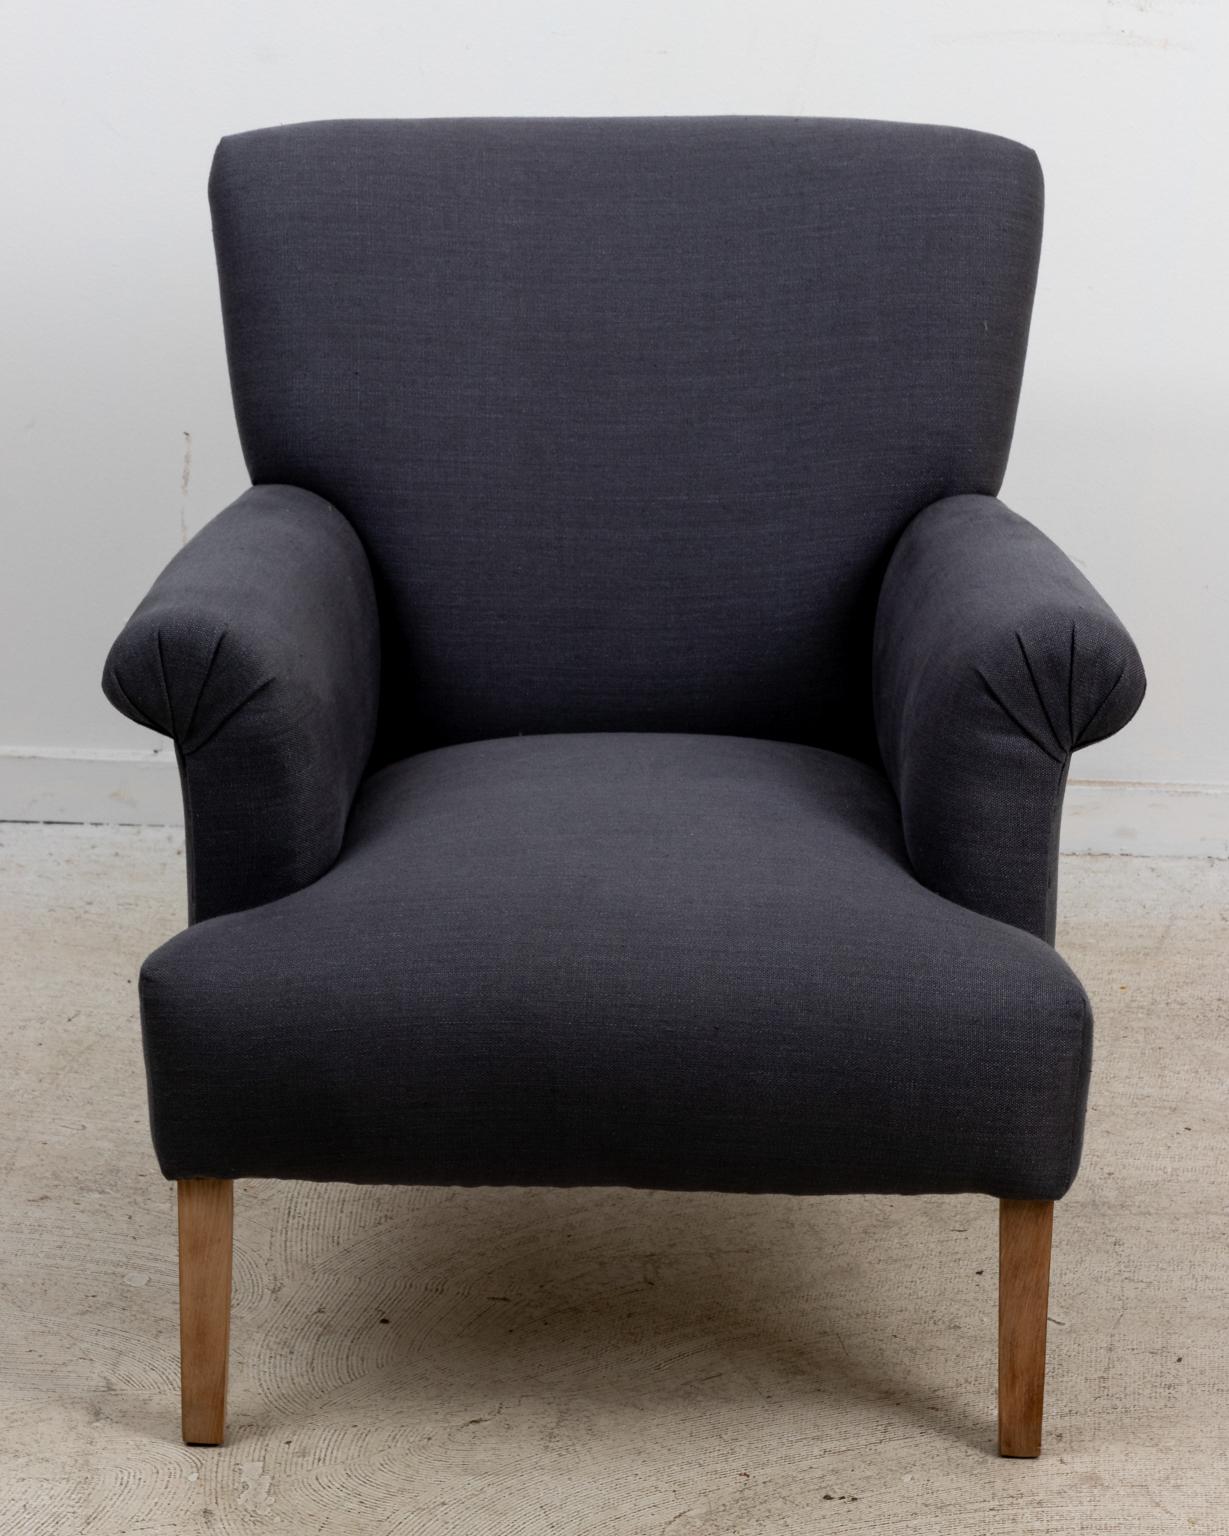 English Pair of Armchairs in Charcoal Linen